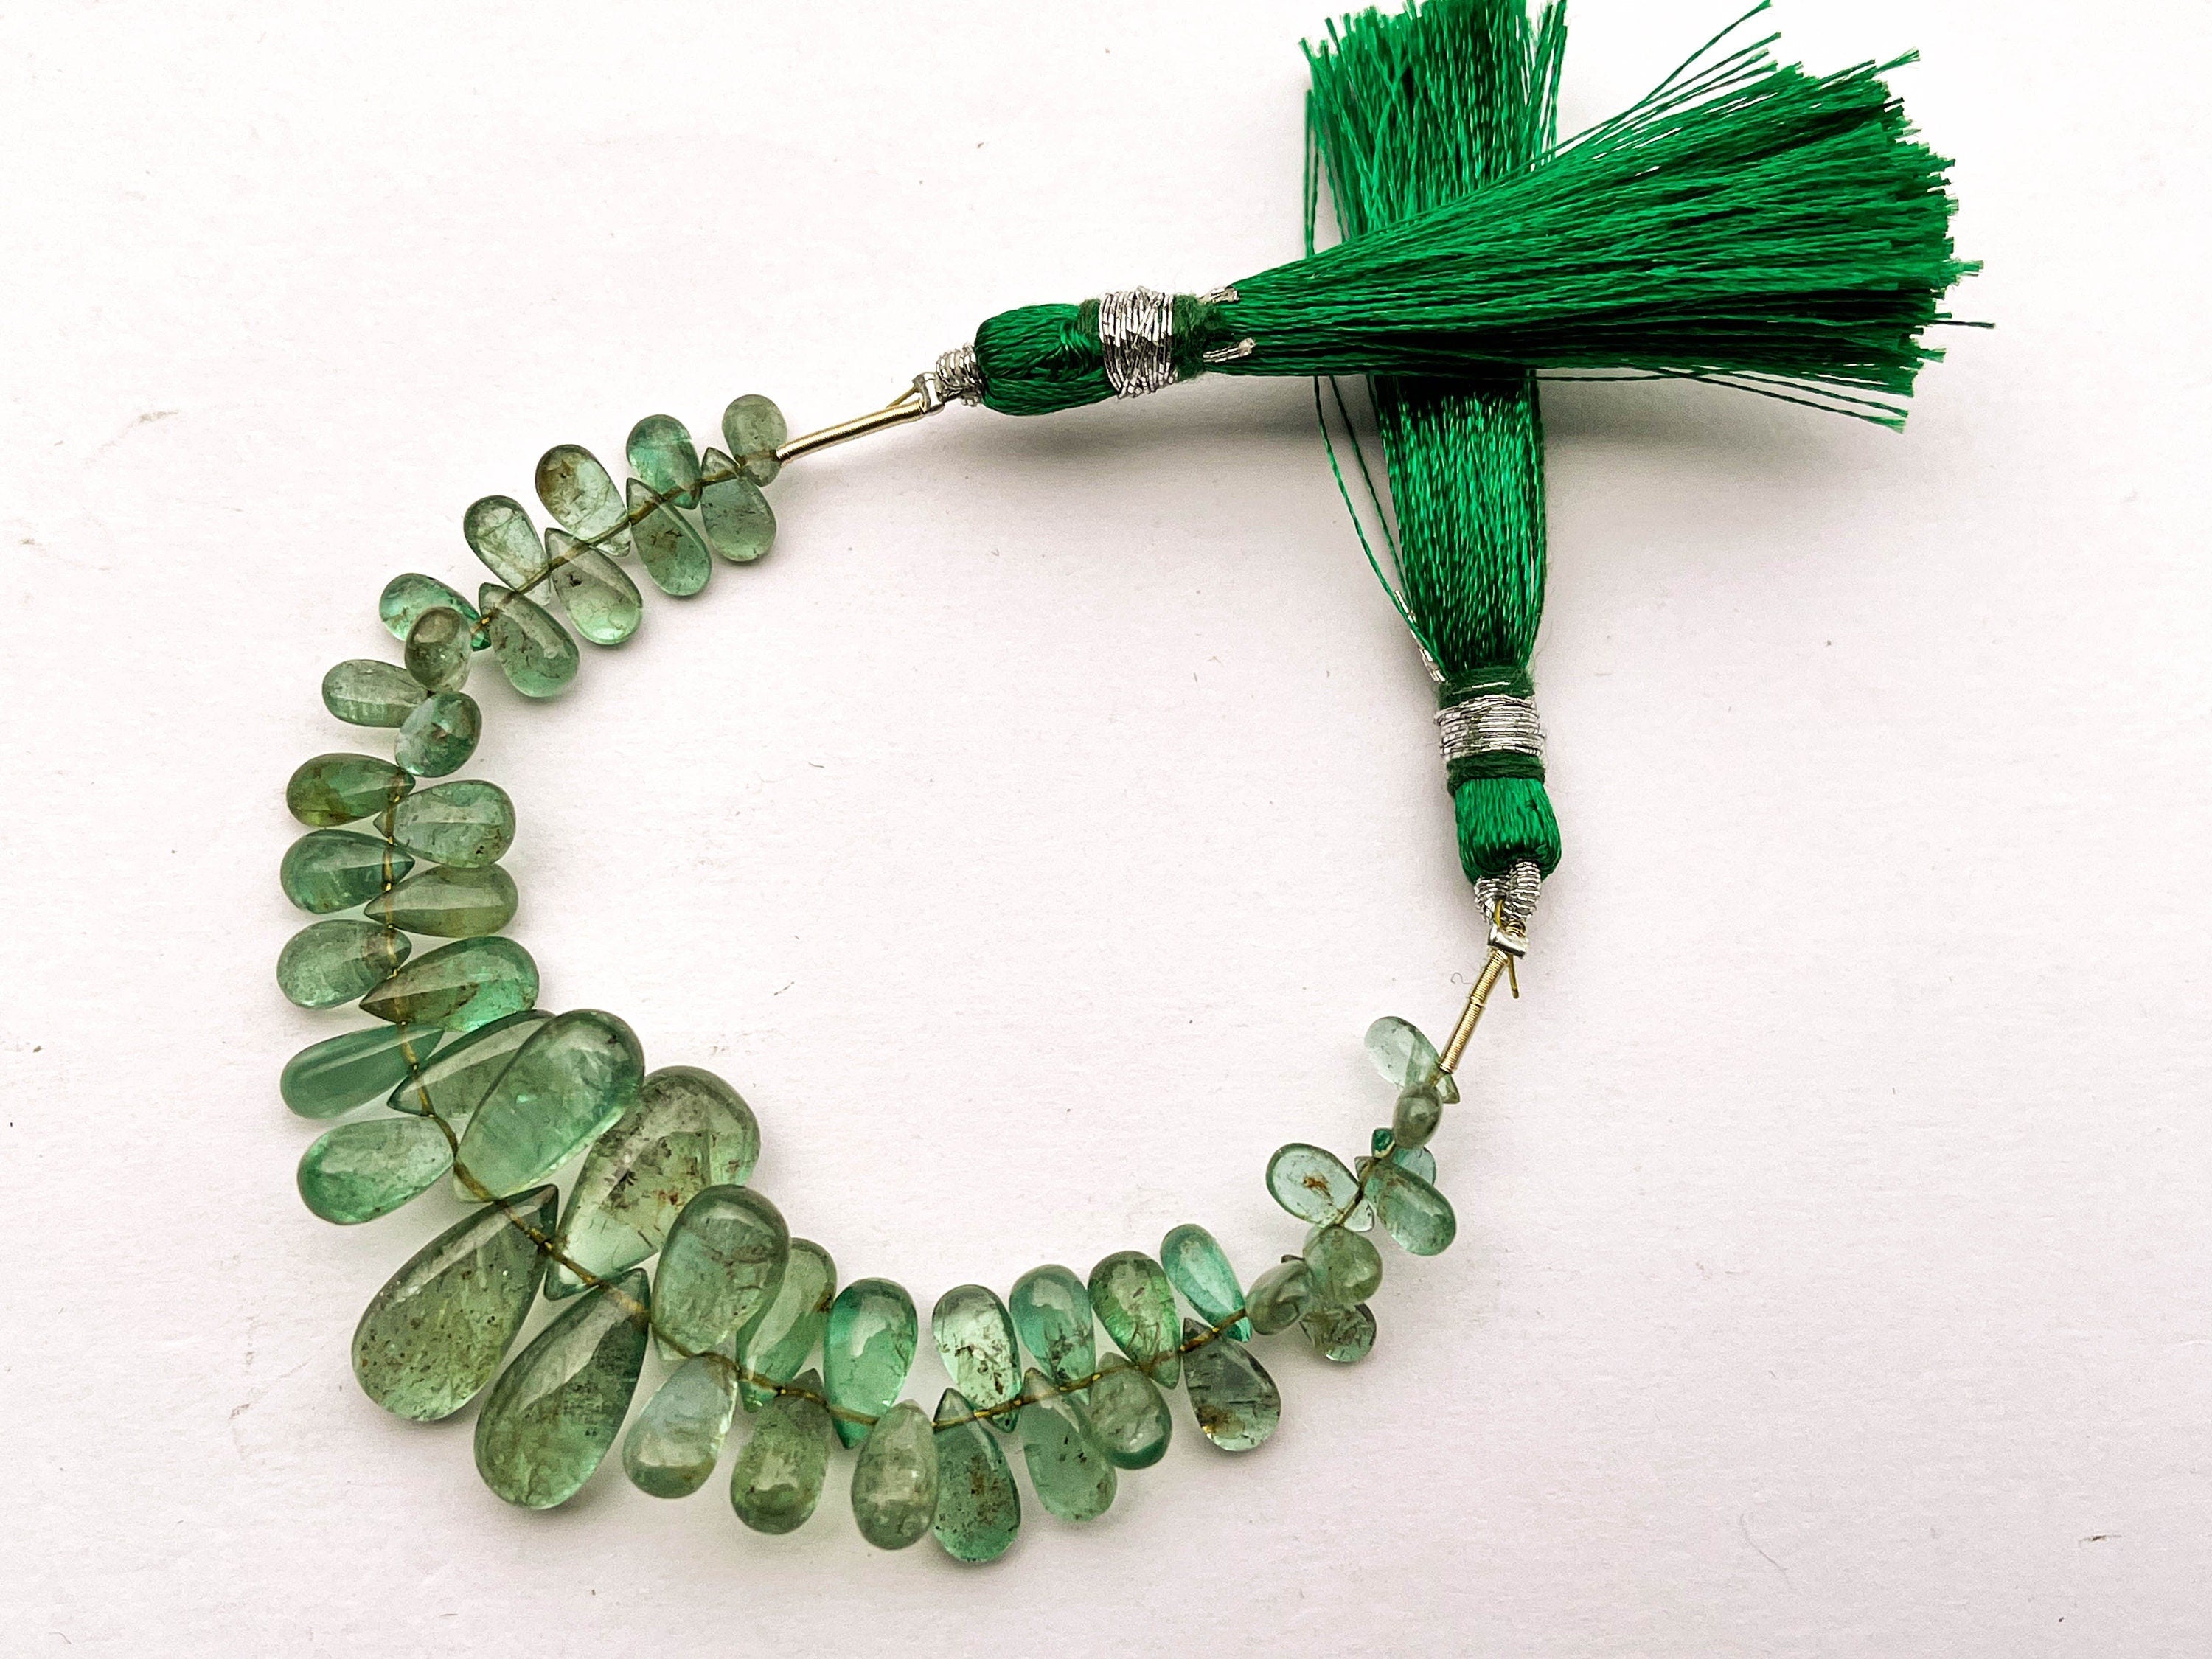 Natural Emerald Smooth Pear Briolette Beads, Zambian Emerald Gemstone, 4x6mm to 8x14mm, 47 Pieces Beadsforyourjewelry